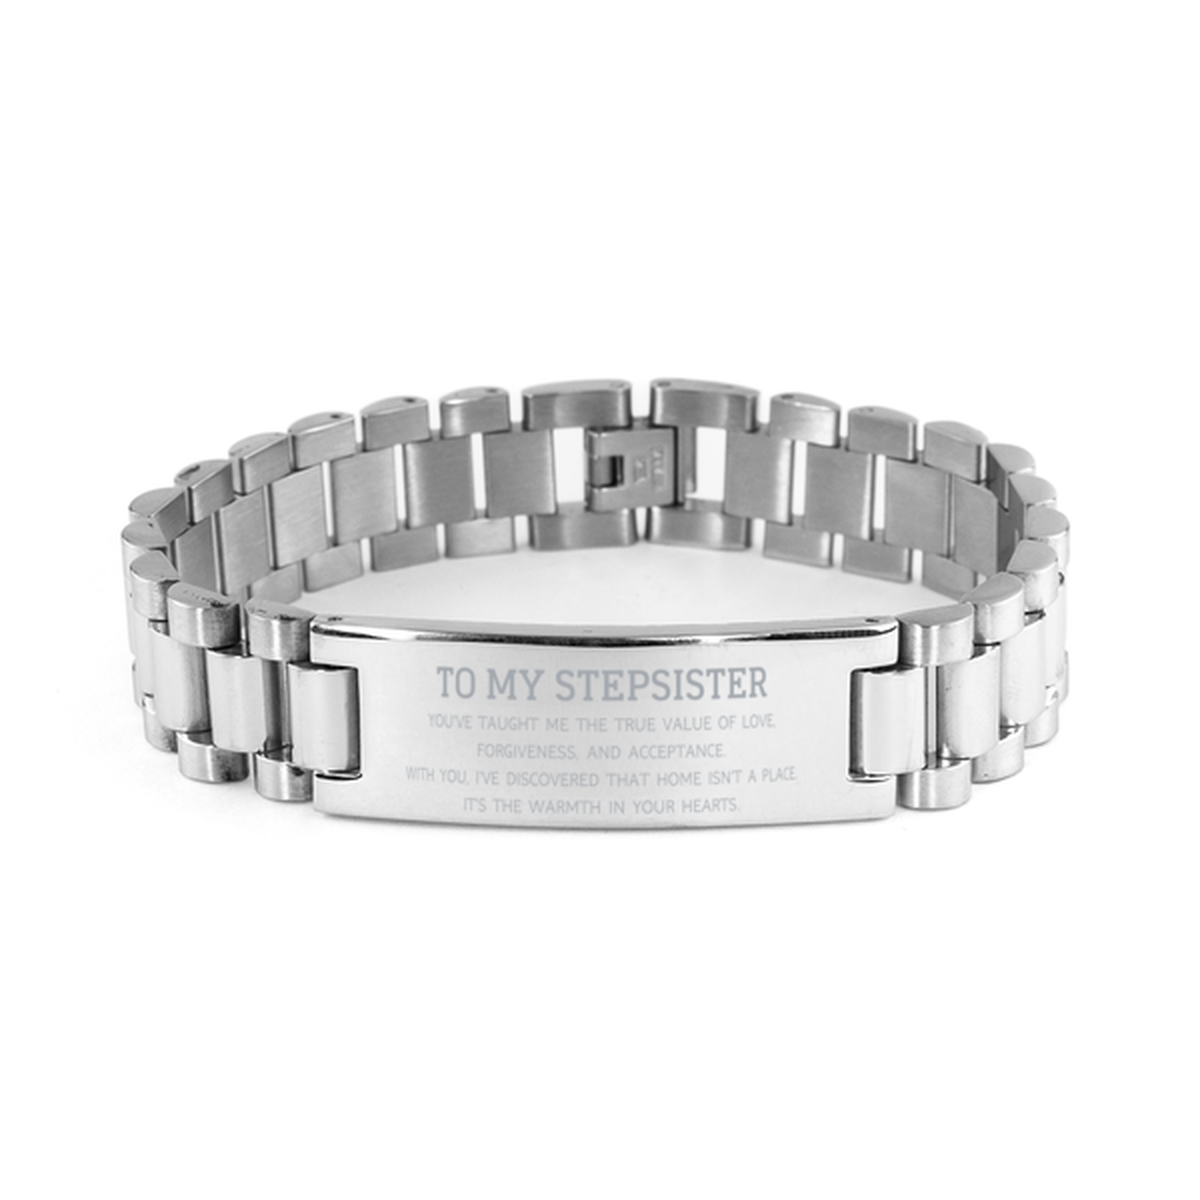 To My Stepsister Gifts, You've taught me the true value of love, Thank You Gifts For Stepsister, Birthday Ladder Stainless Steel Bracelet For Stepsister